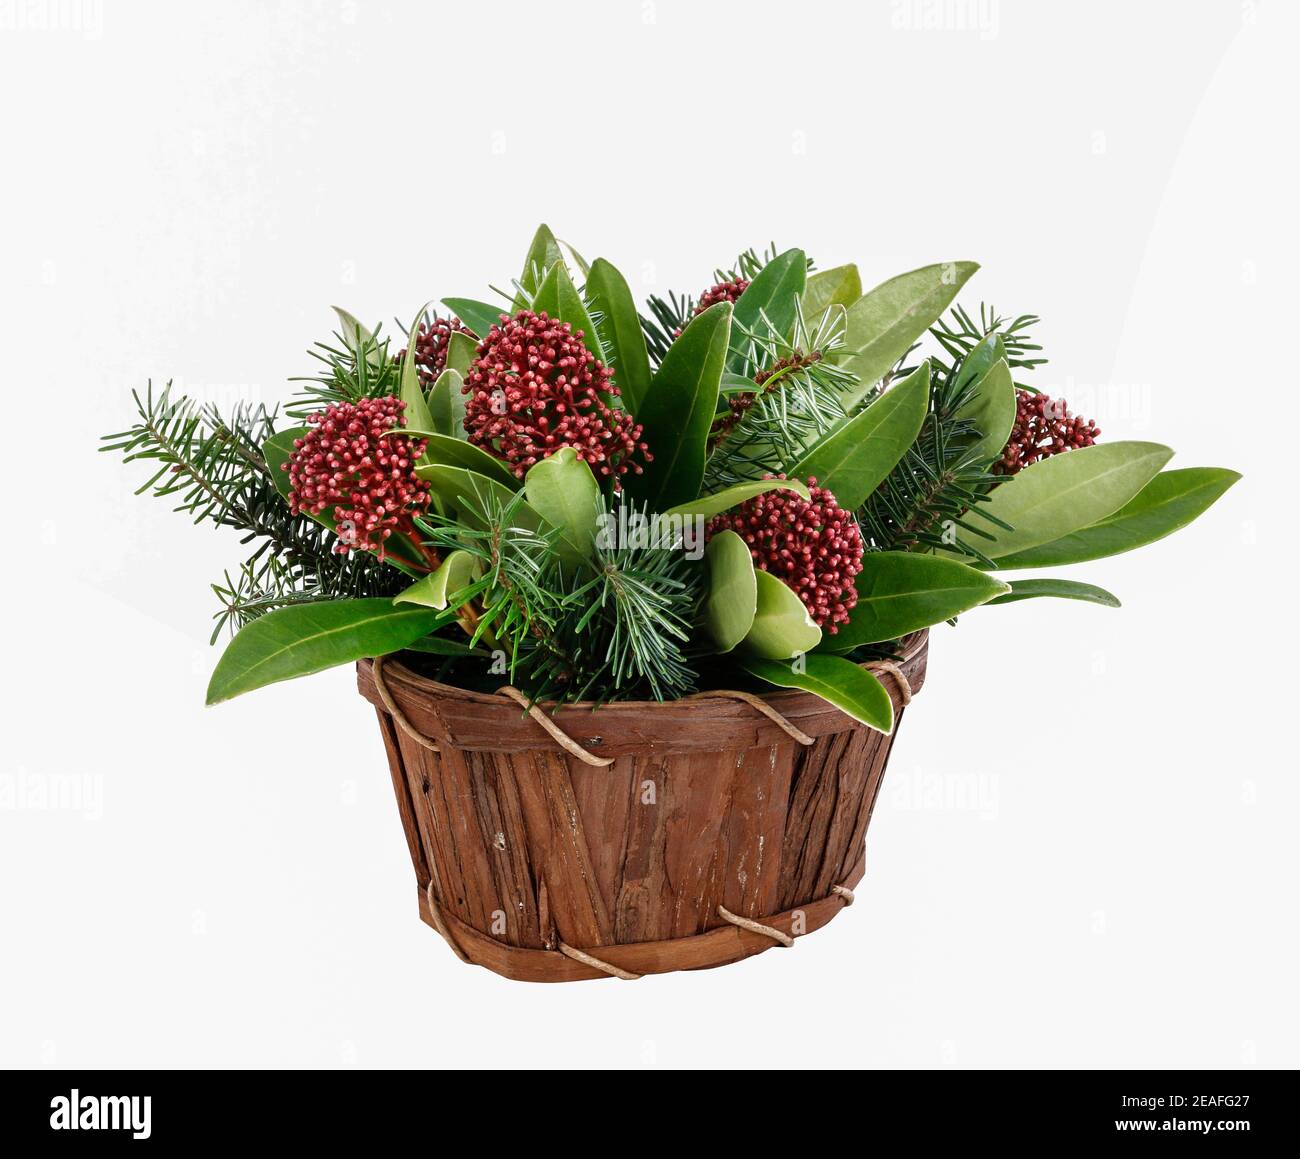 Florist at work: woman shows how to make floral arrangement with  skimmia (Skimmia japonica), an evergreen shrub and fir twigs. Step by step, tutorial Stock Photo